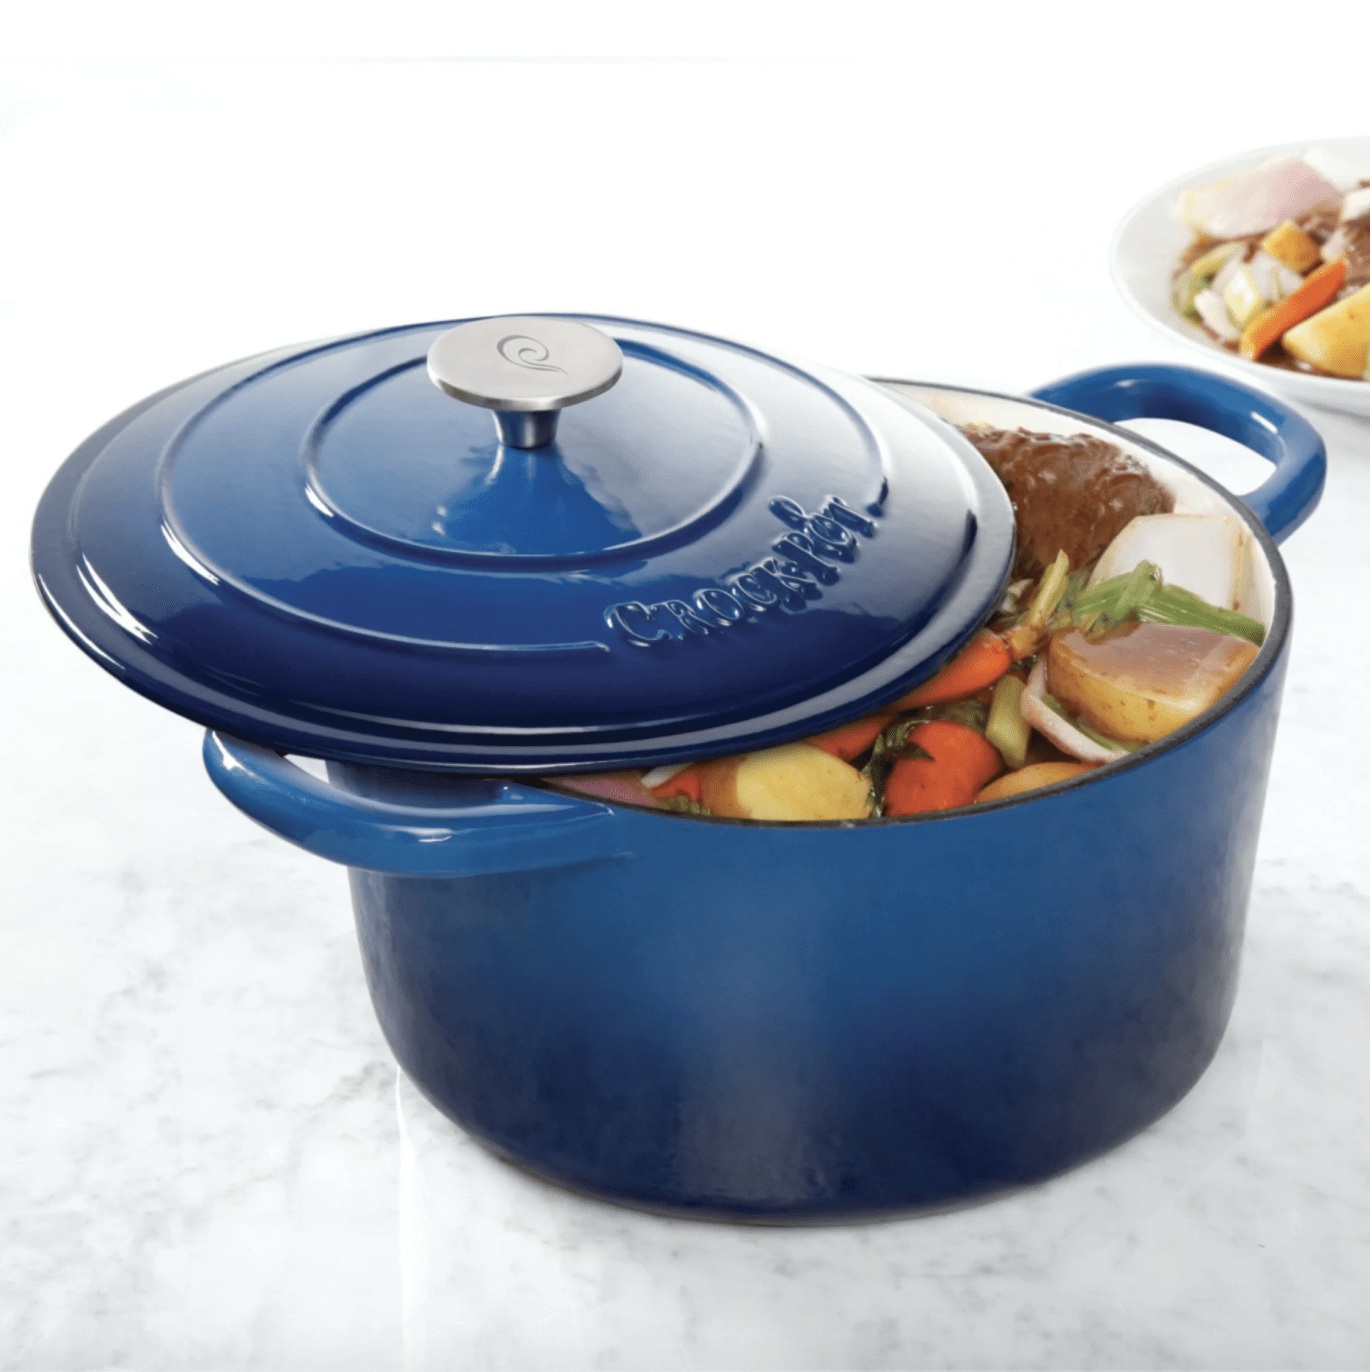 Shop Dutch ovens from Staub, Lodge and more — all under $100